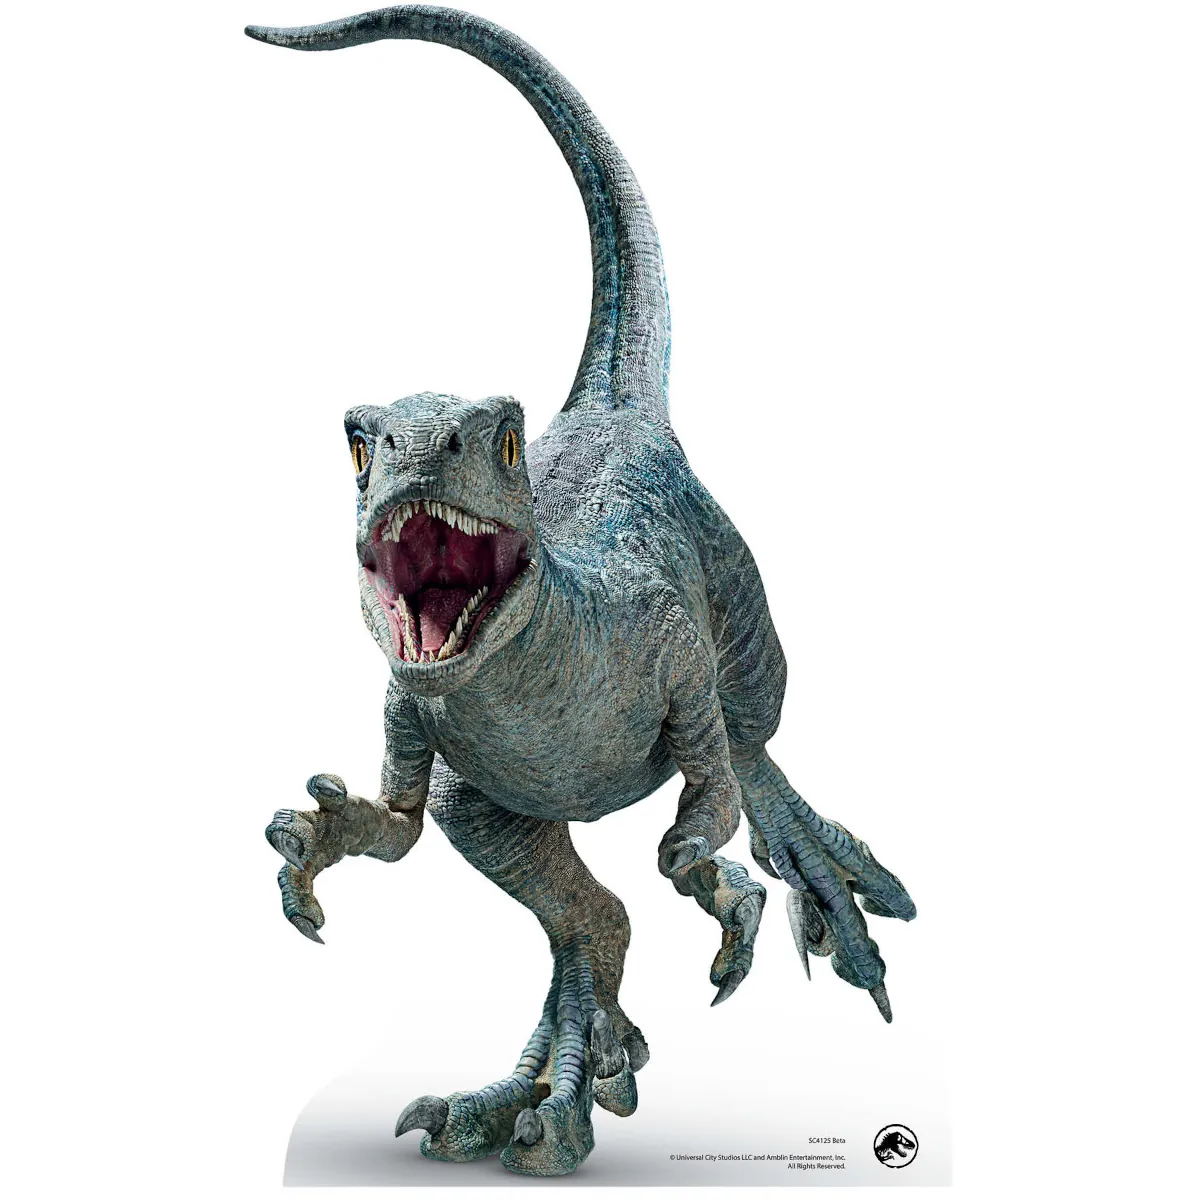 SC4125 Beta Velociraptor (Jurassic World Dominion) Official Large Cardboard Cutout Standee Front